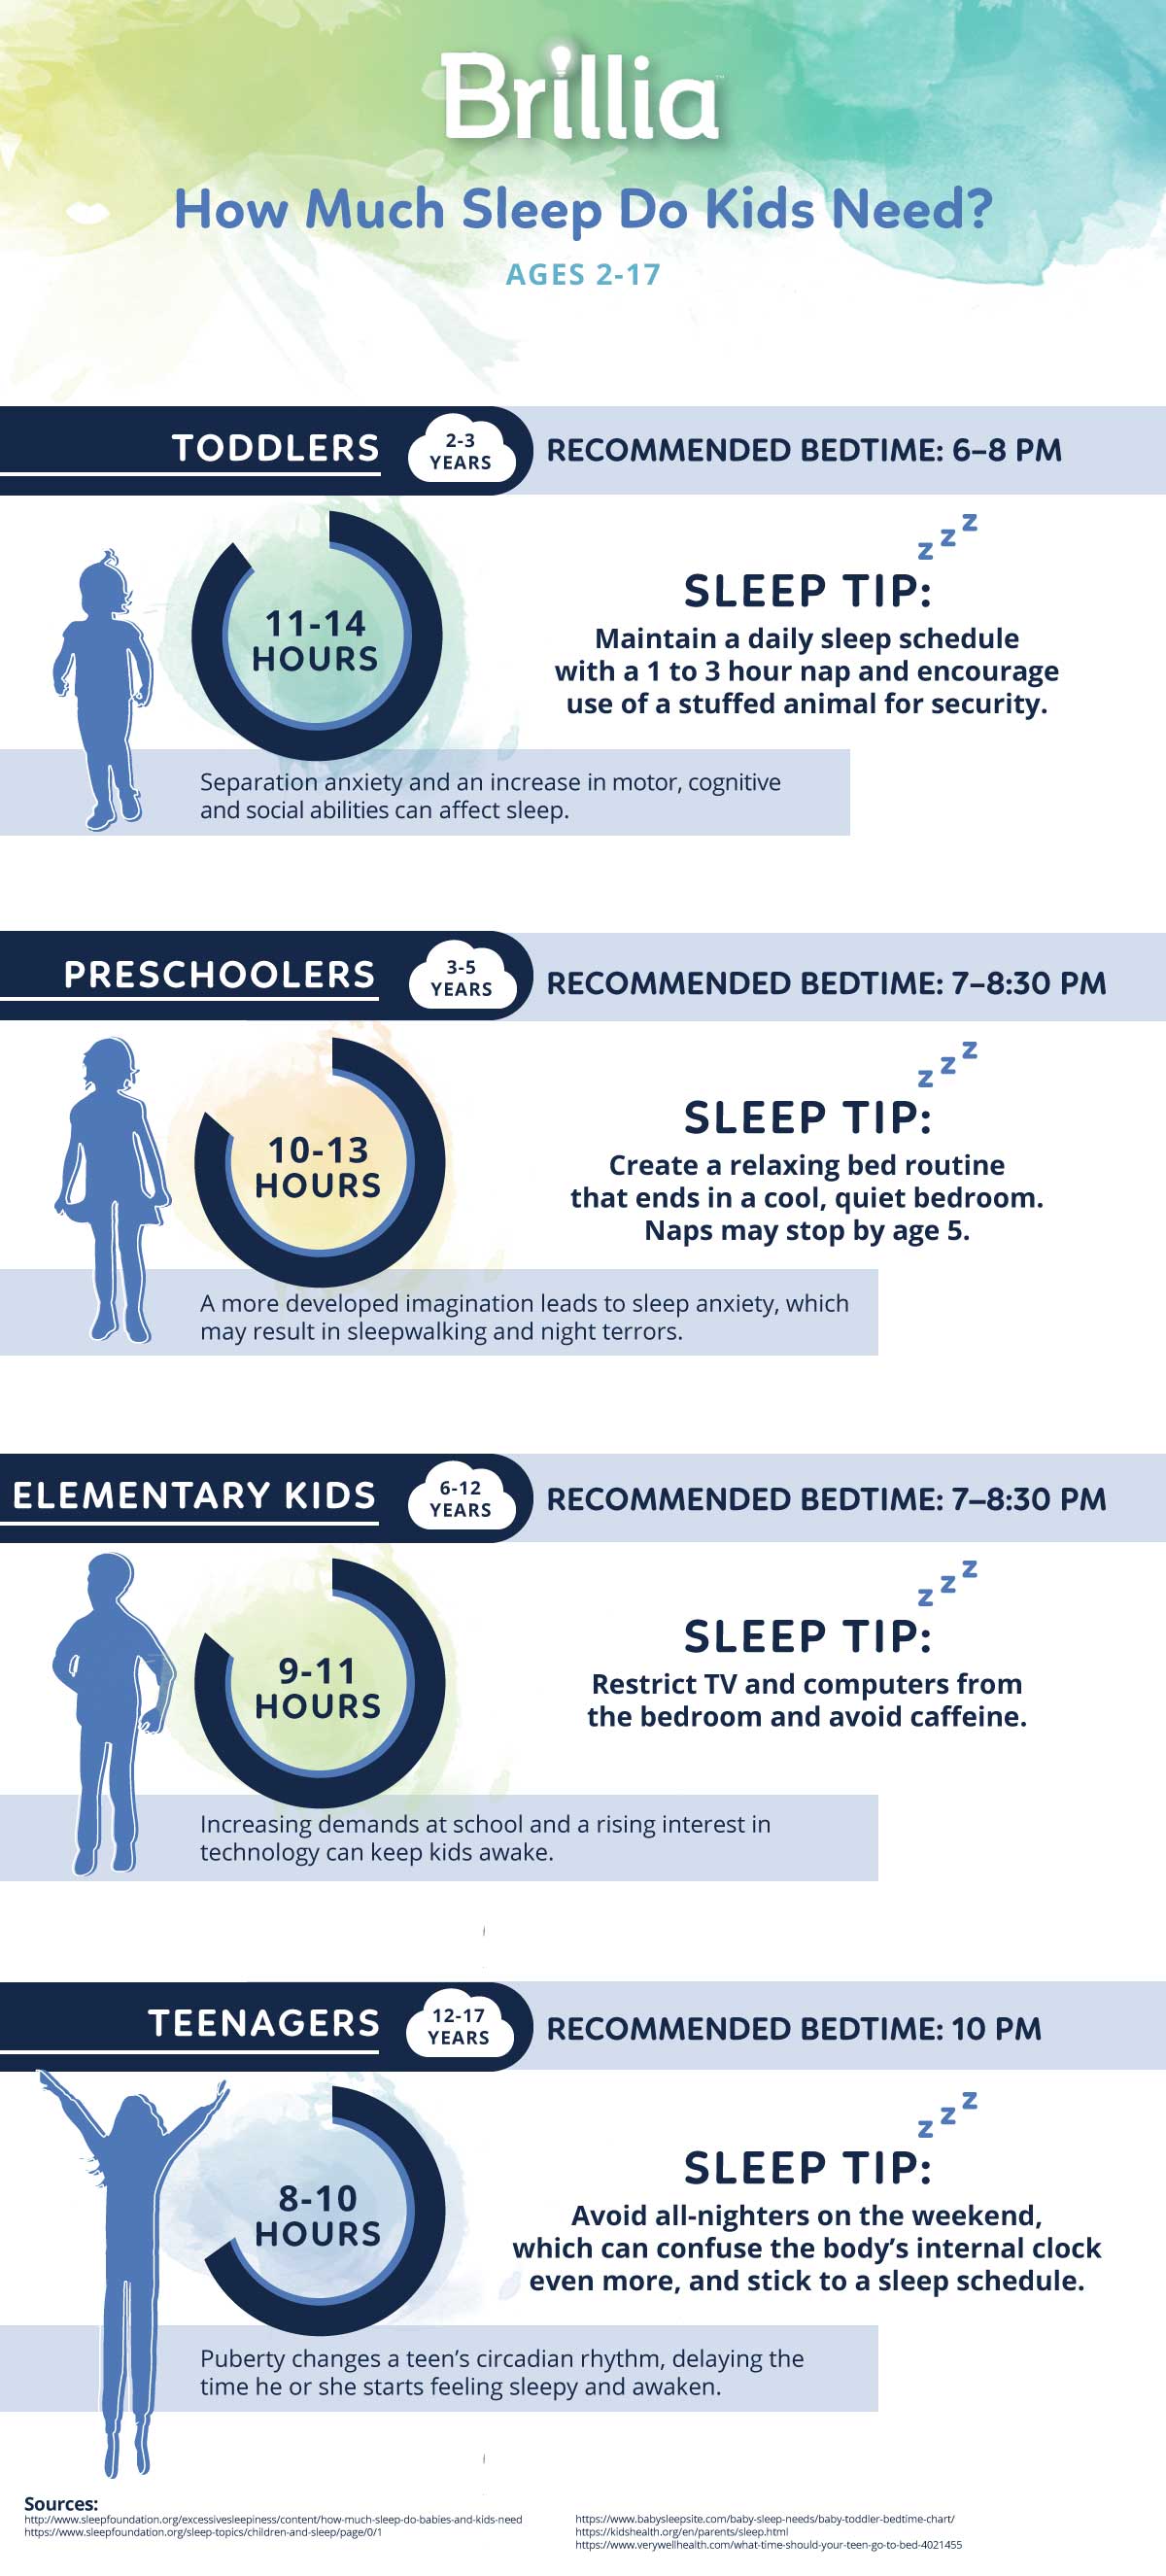 Infographic: Recommended Amount of Sleep for Kids Based On Age Range